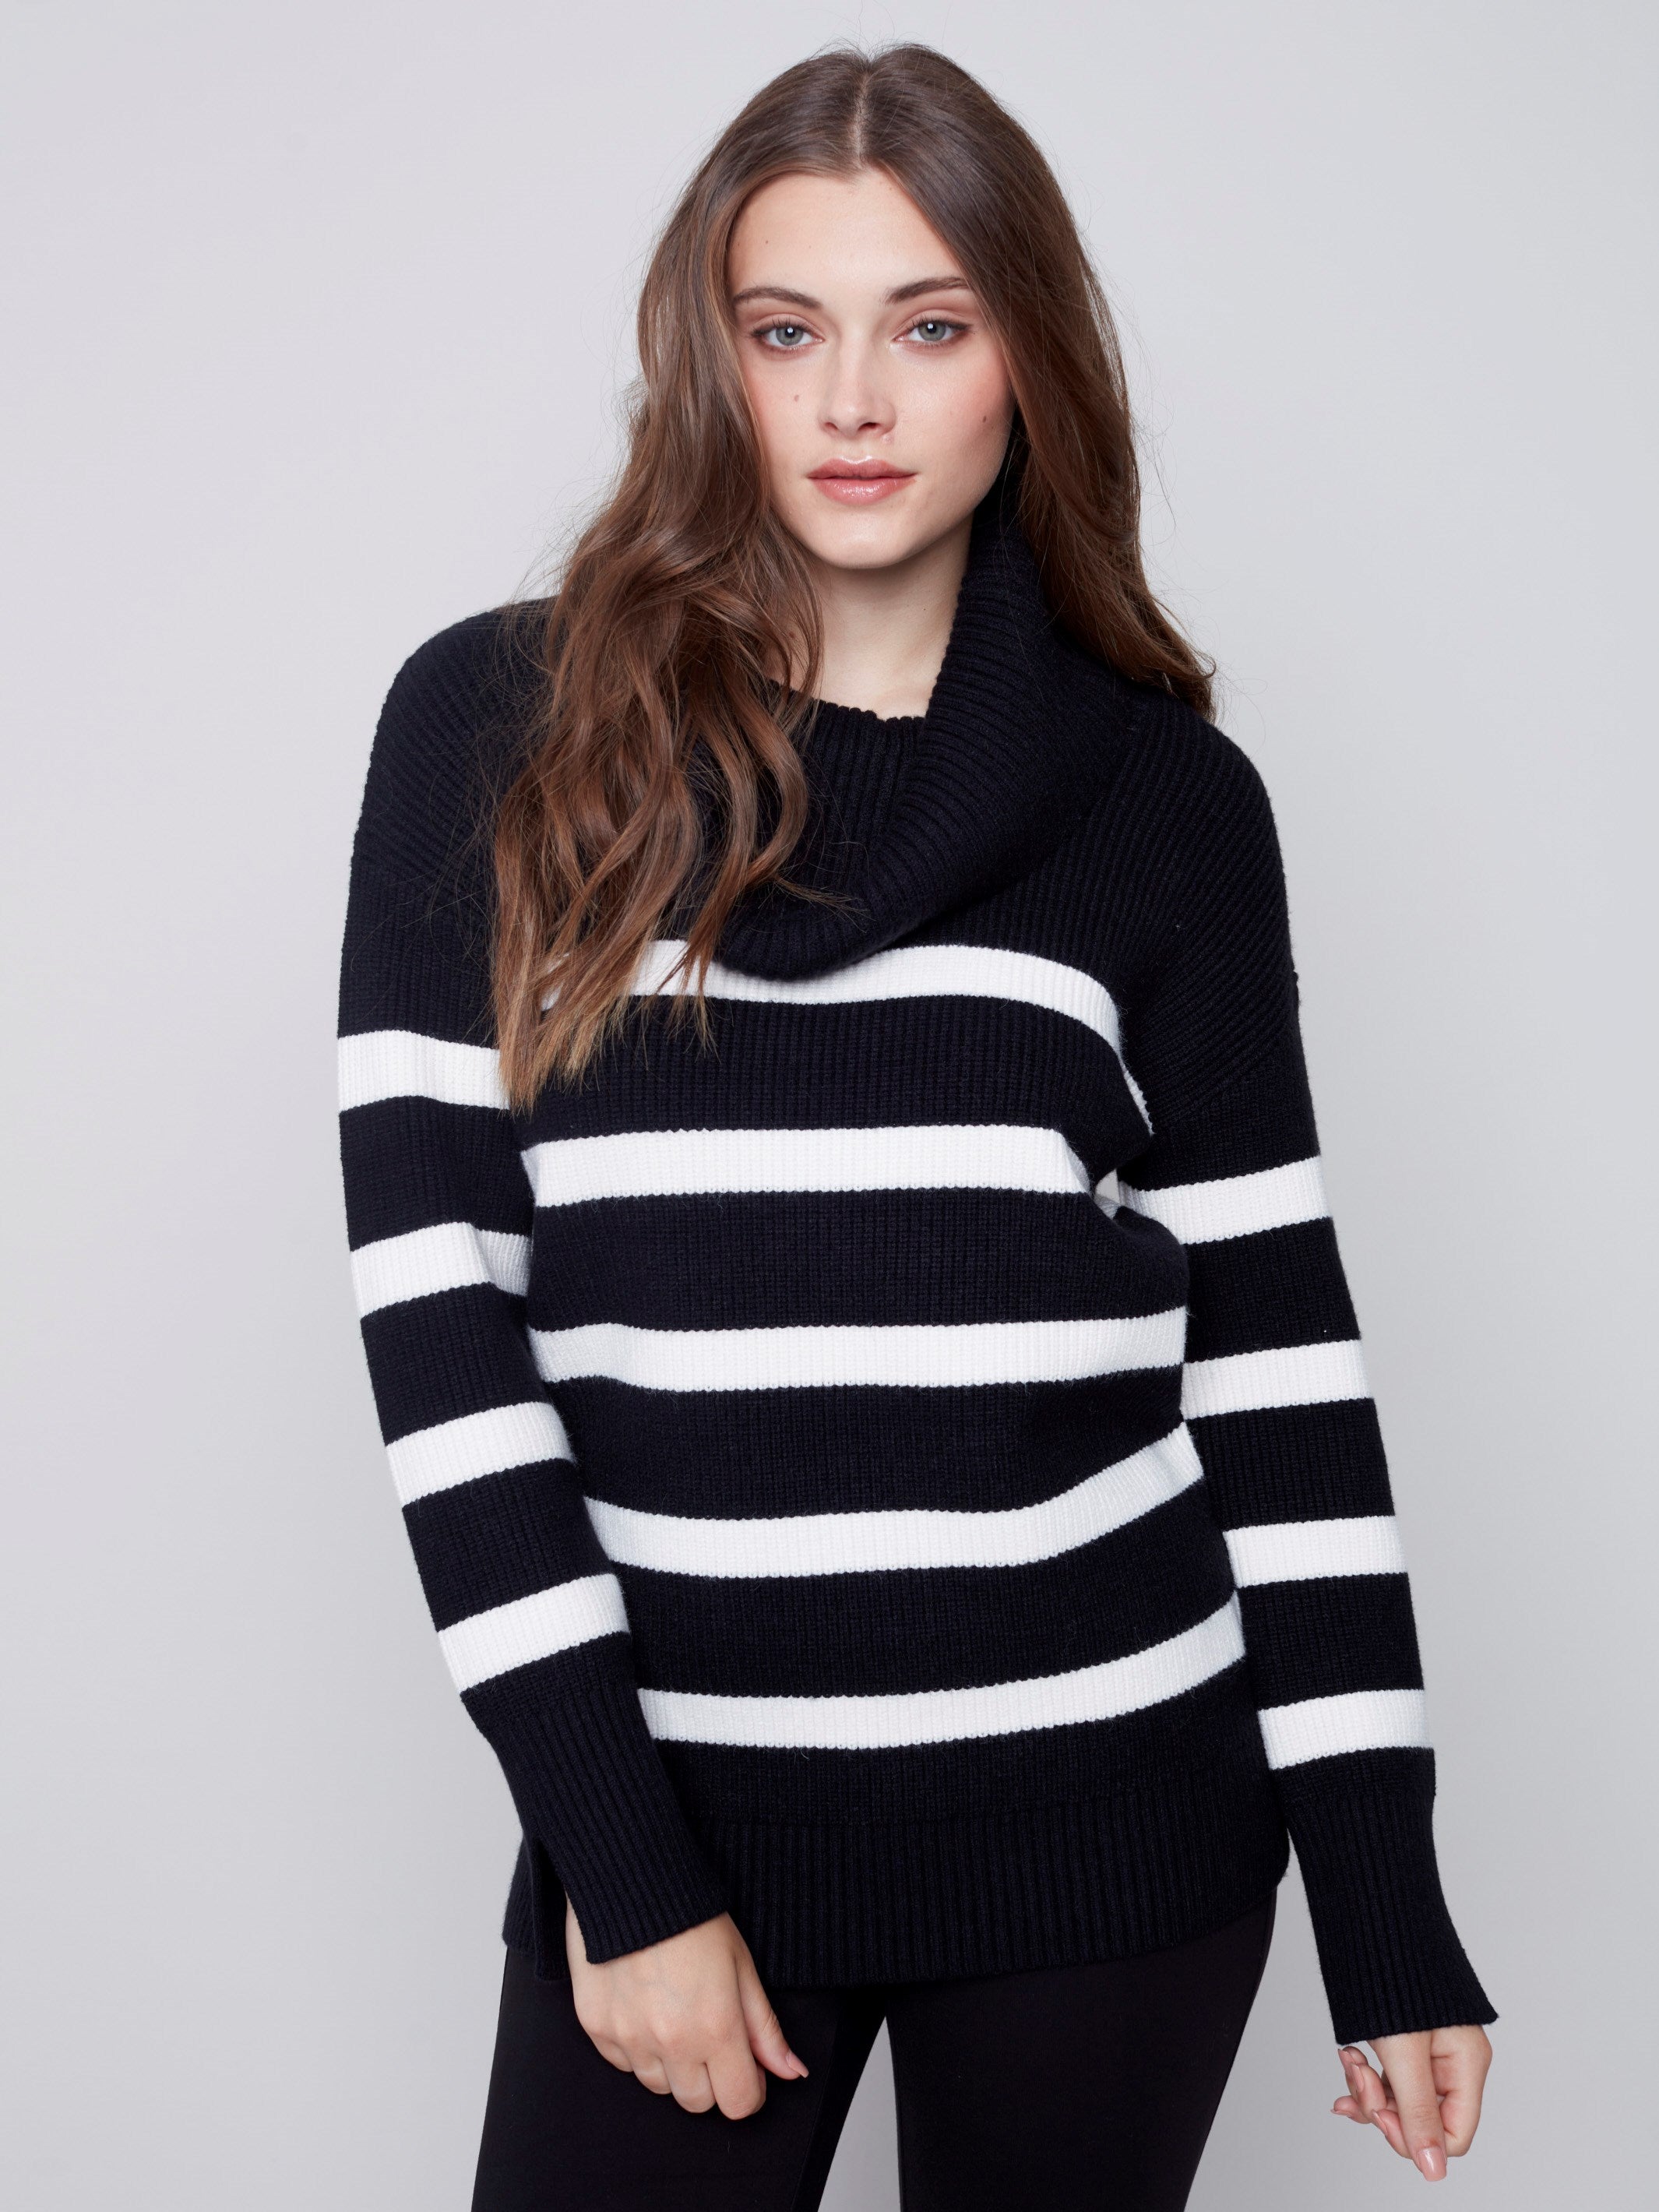 Striped Sweater with Cowl Neck - Black